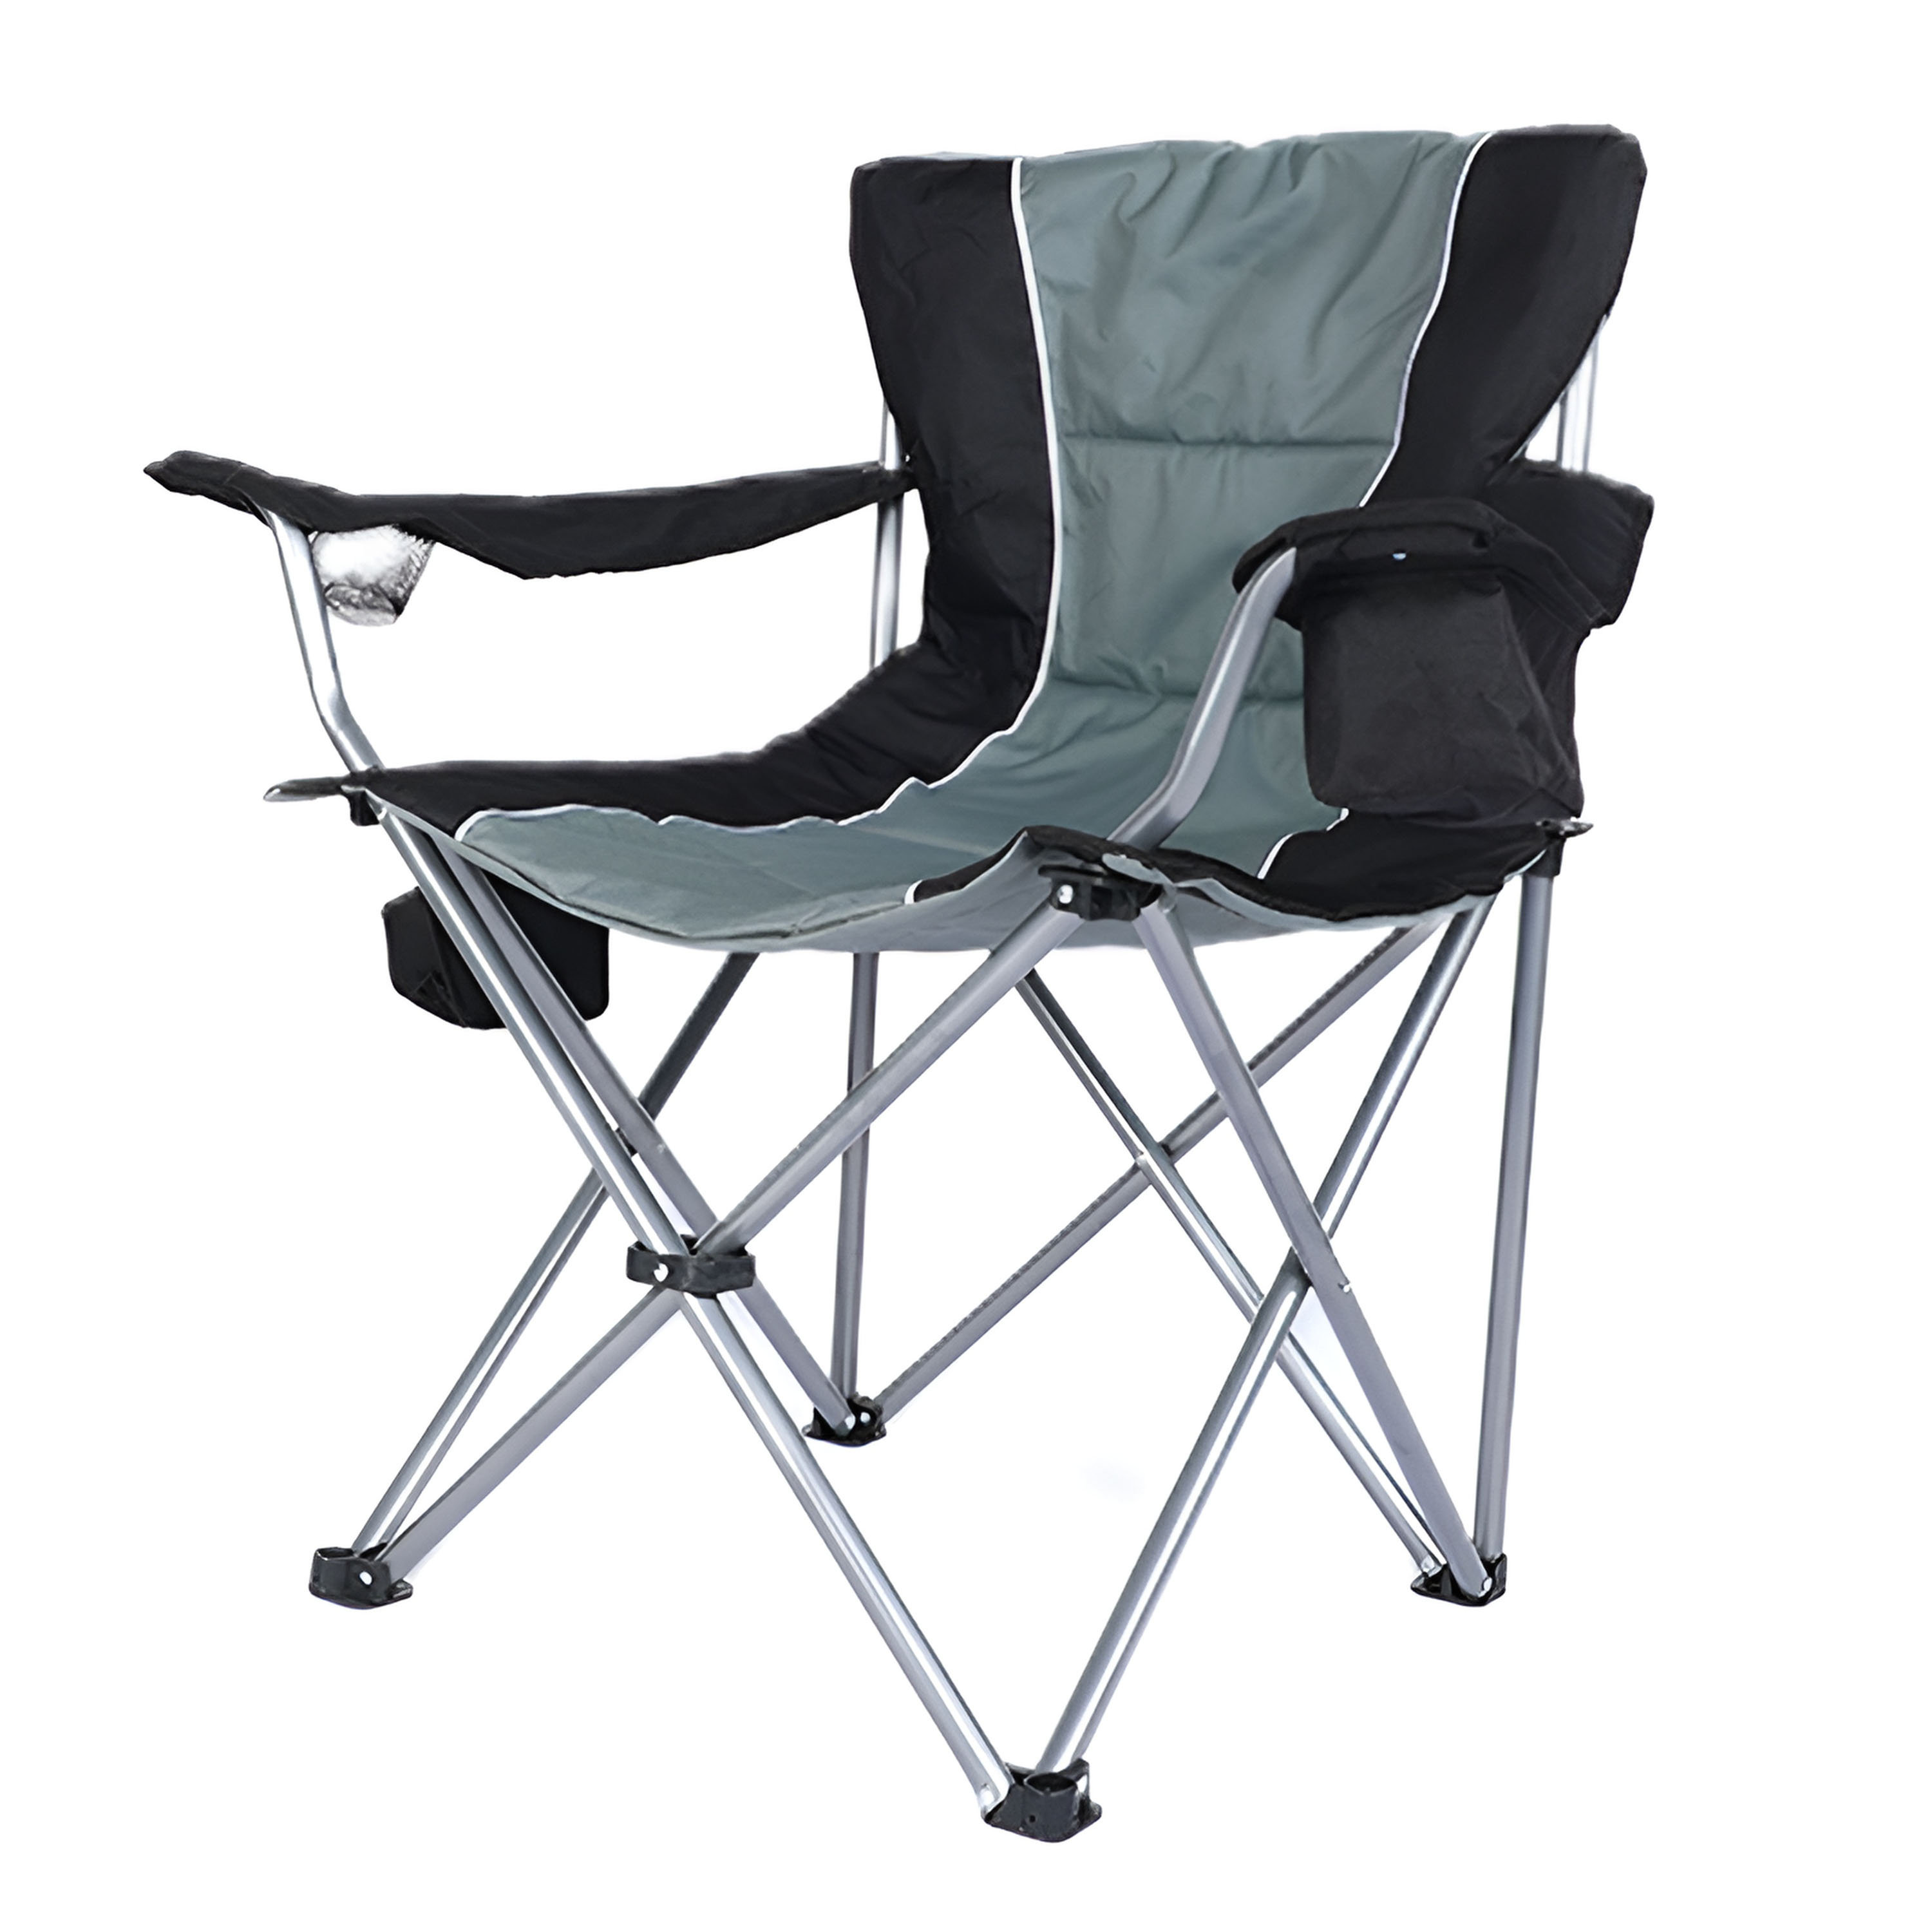 Arlmont  Co. Nechama Folding Camping Chair with Cushions Wayfair